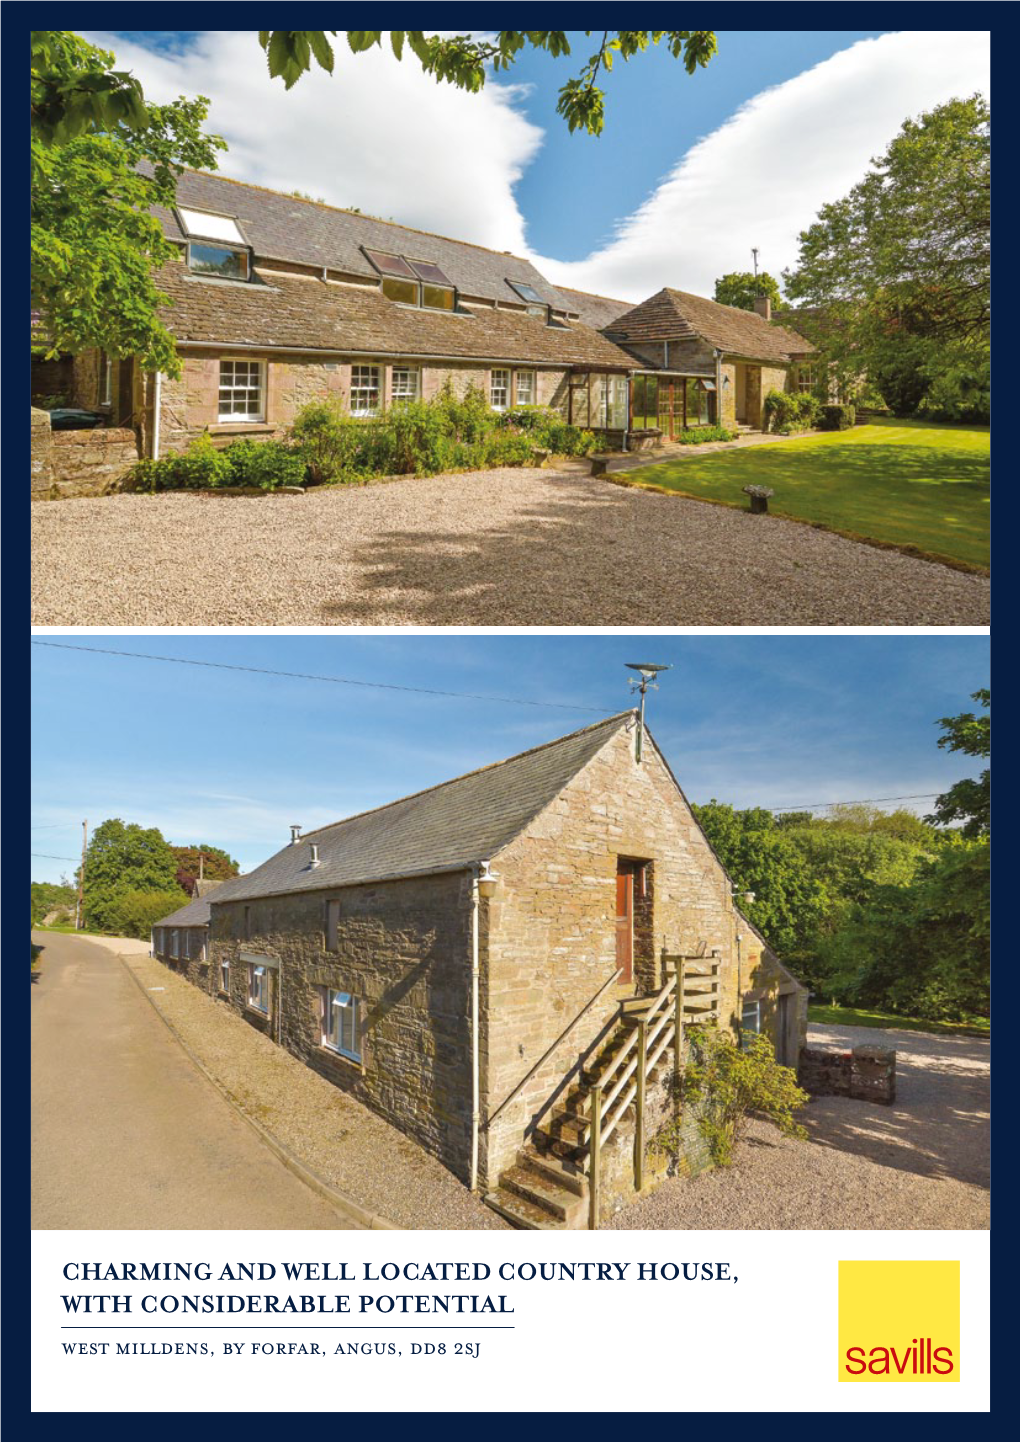 Charming and Well Located Country House, with Considerable Potential West Milldens, by Forfar, Angus, Dd8 2Sj Far Back As 1685 and Was Altered in 1756 and 1858